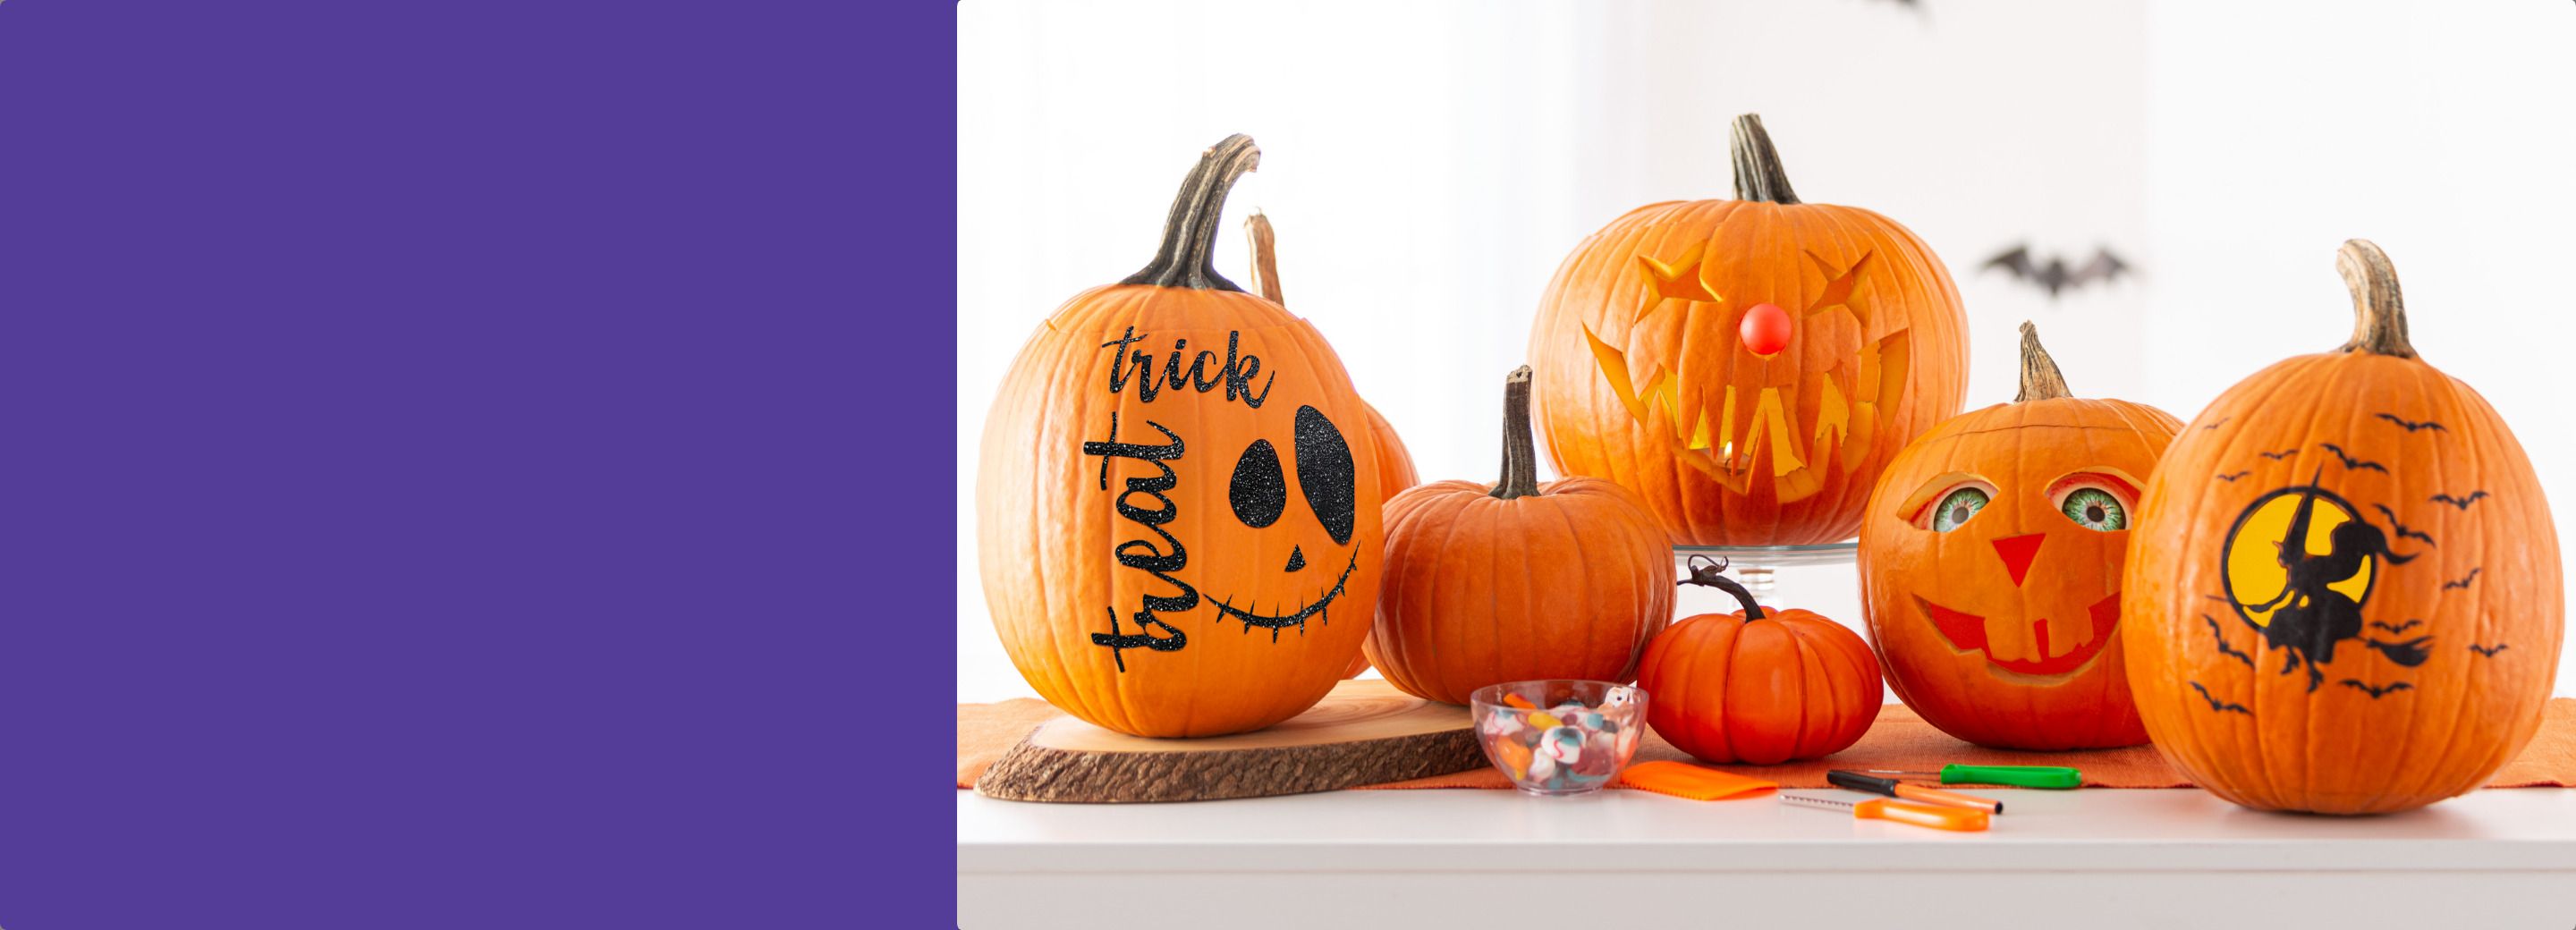 A variety of carved and decorated pumpkins sitting on a countertop with carving tools and a bowl of pumpkin decorating accessories.